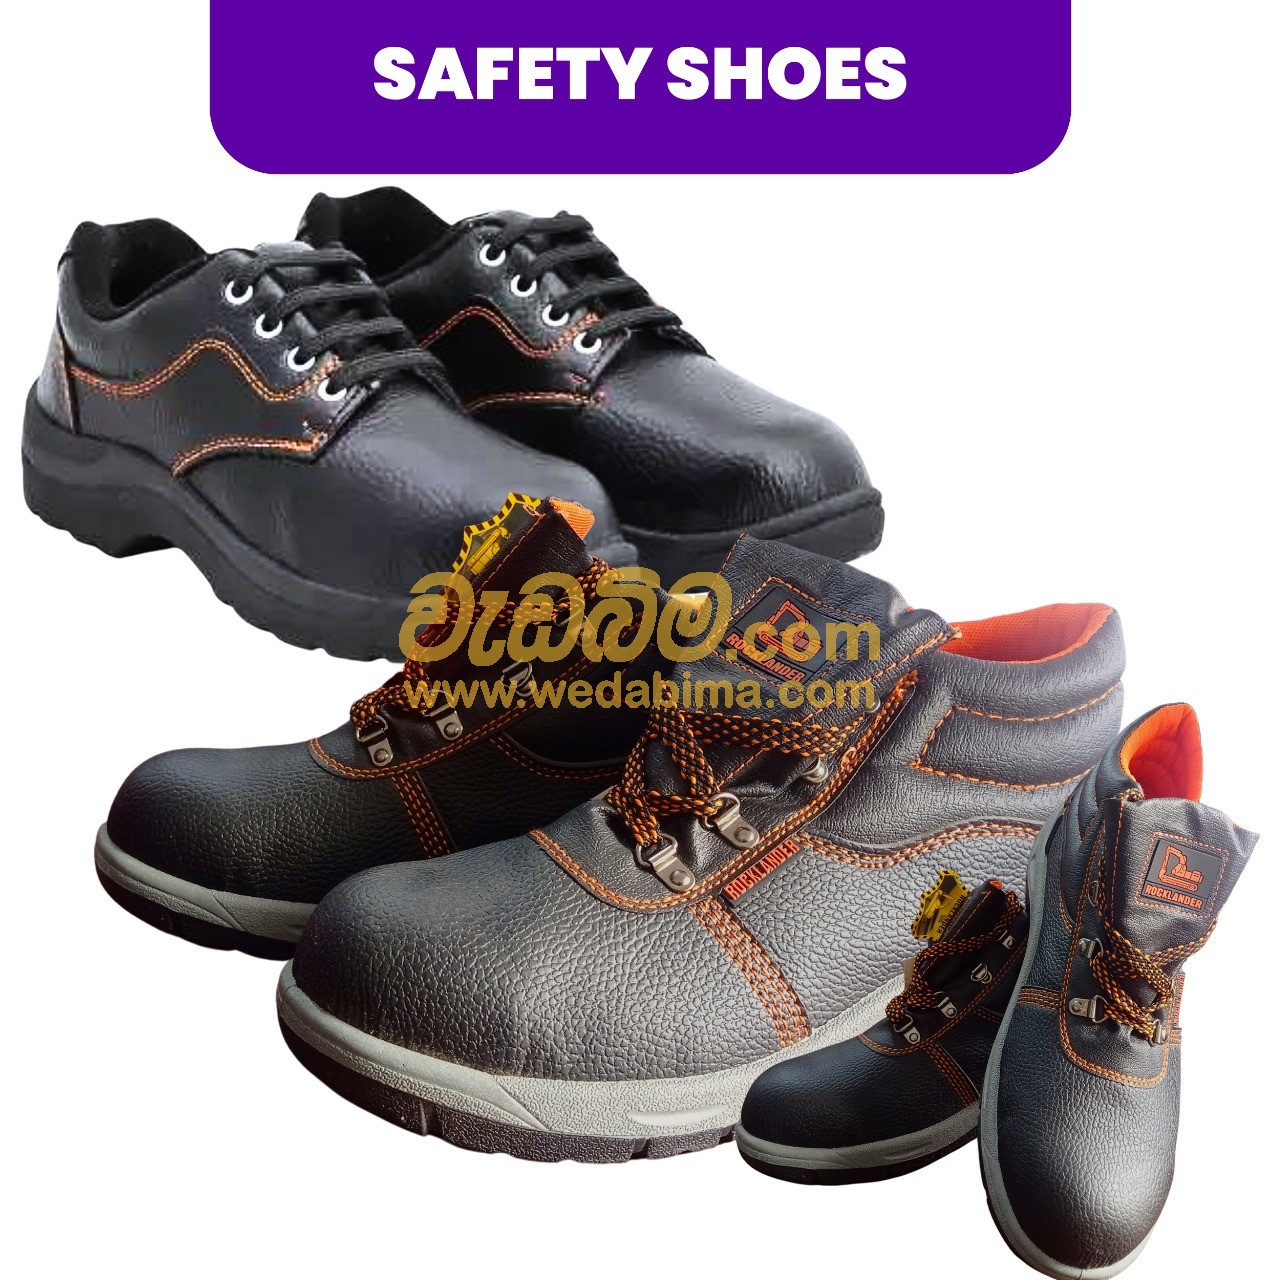 Safety Shoe - Safety First Personal Protective Equipment